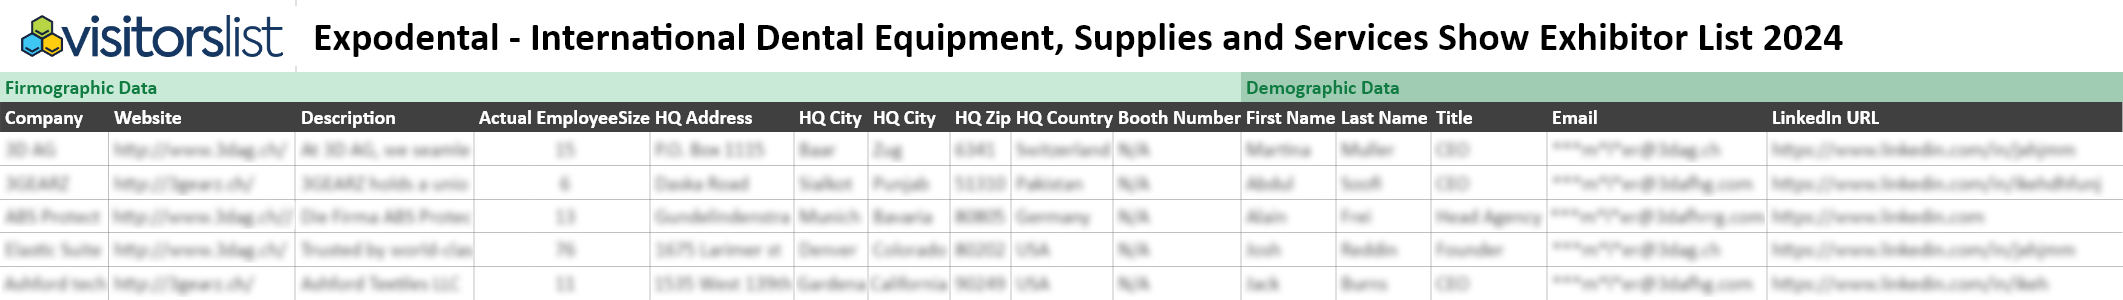 Expodental - International Dental Equipment, Supplies and Services Show Exhibitors List 2024